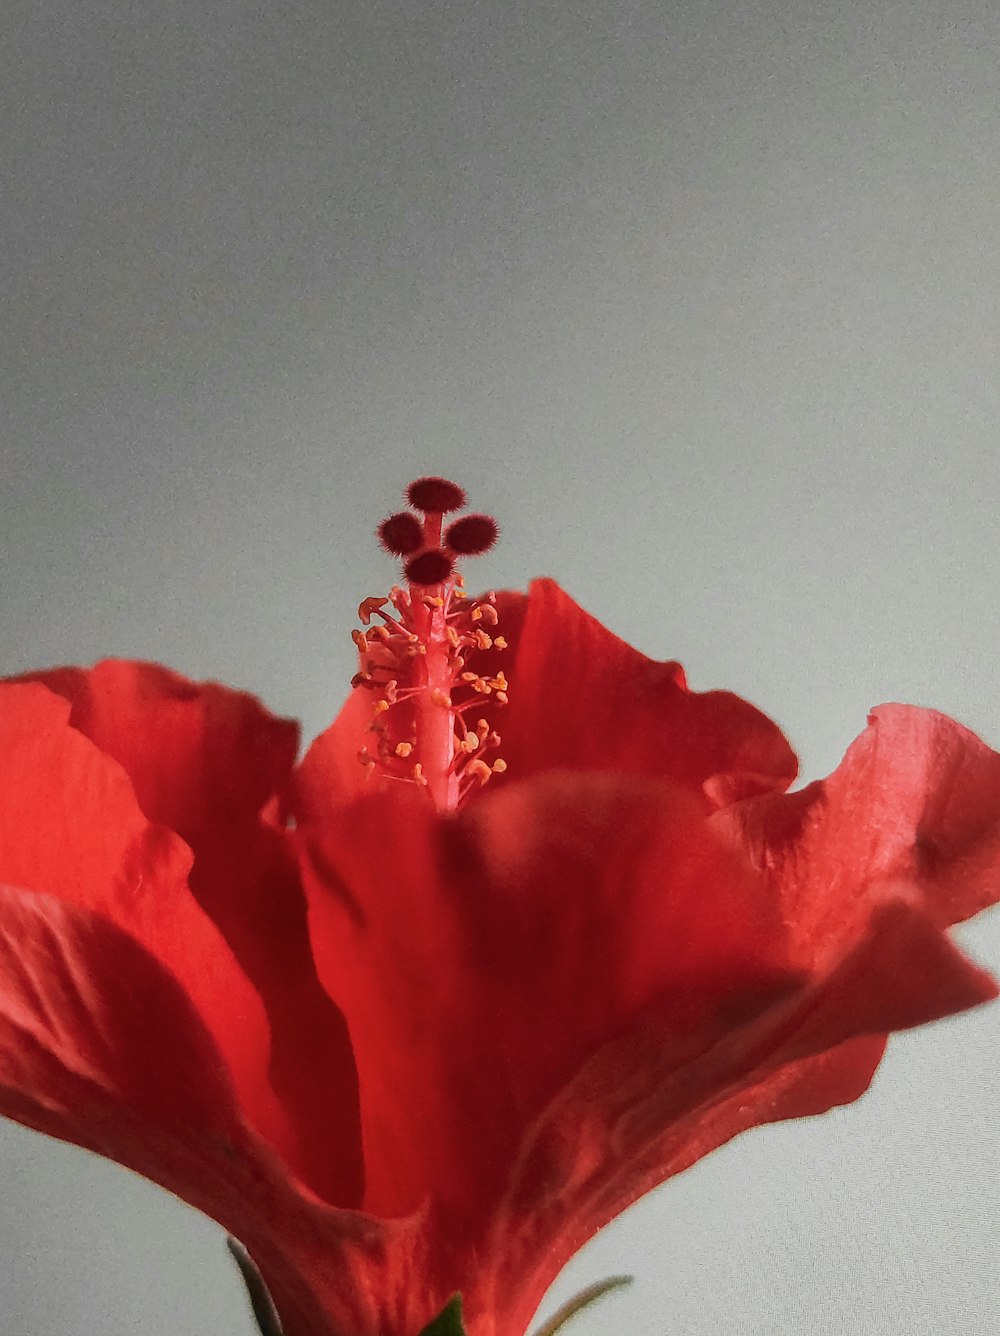 a red flower is in a glass vase